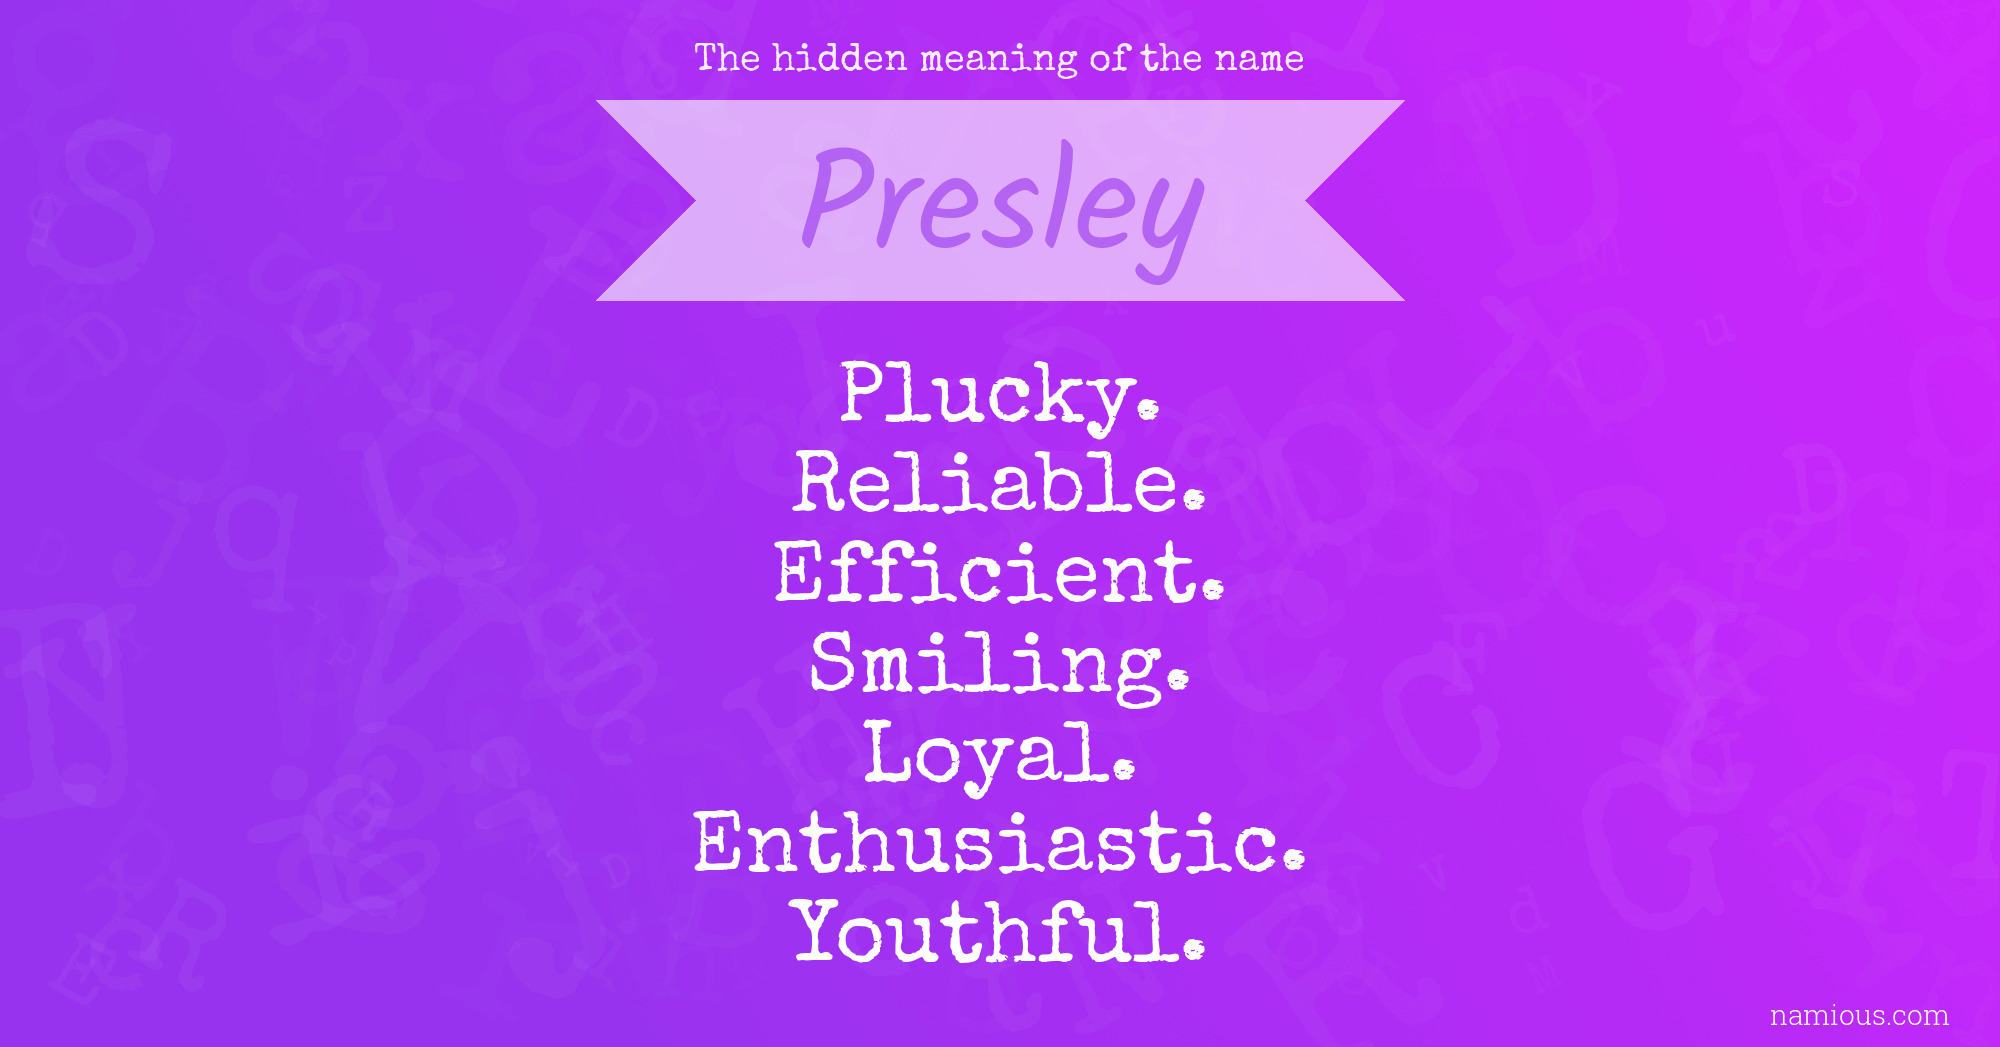 The hidden meaning of the name Presley